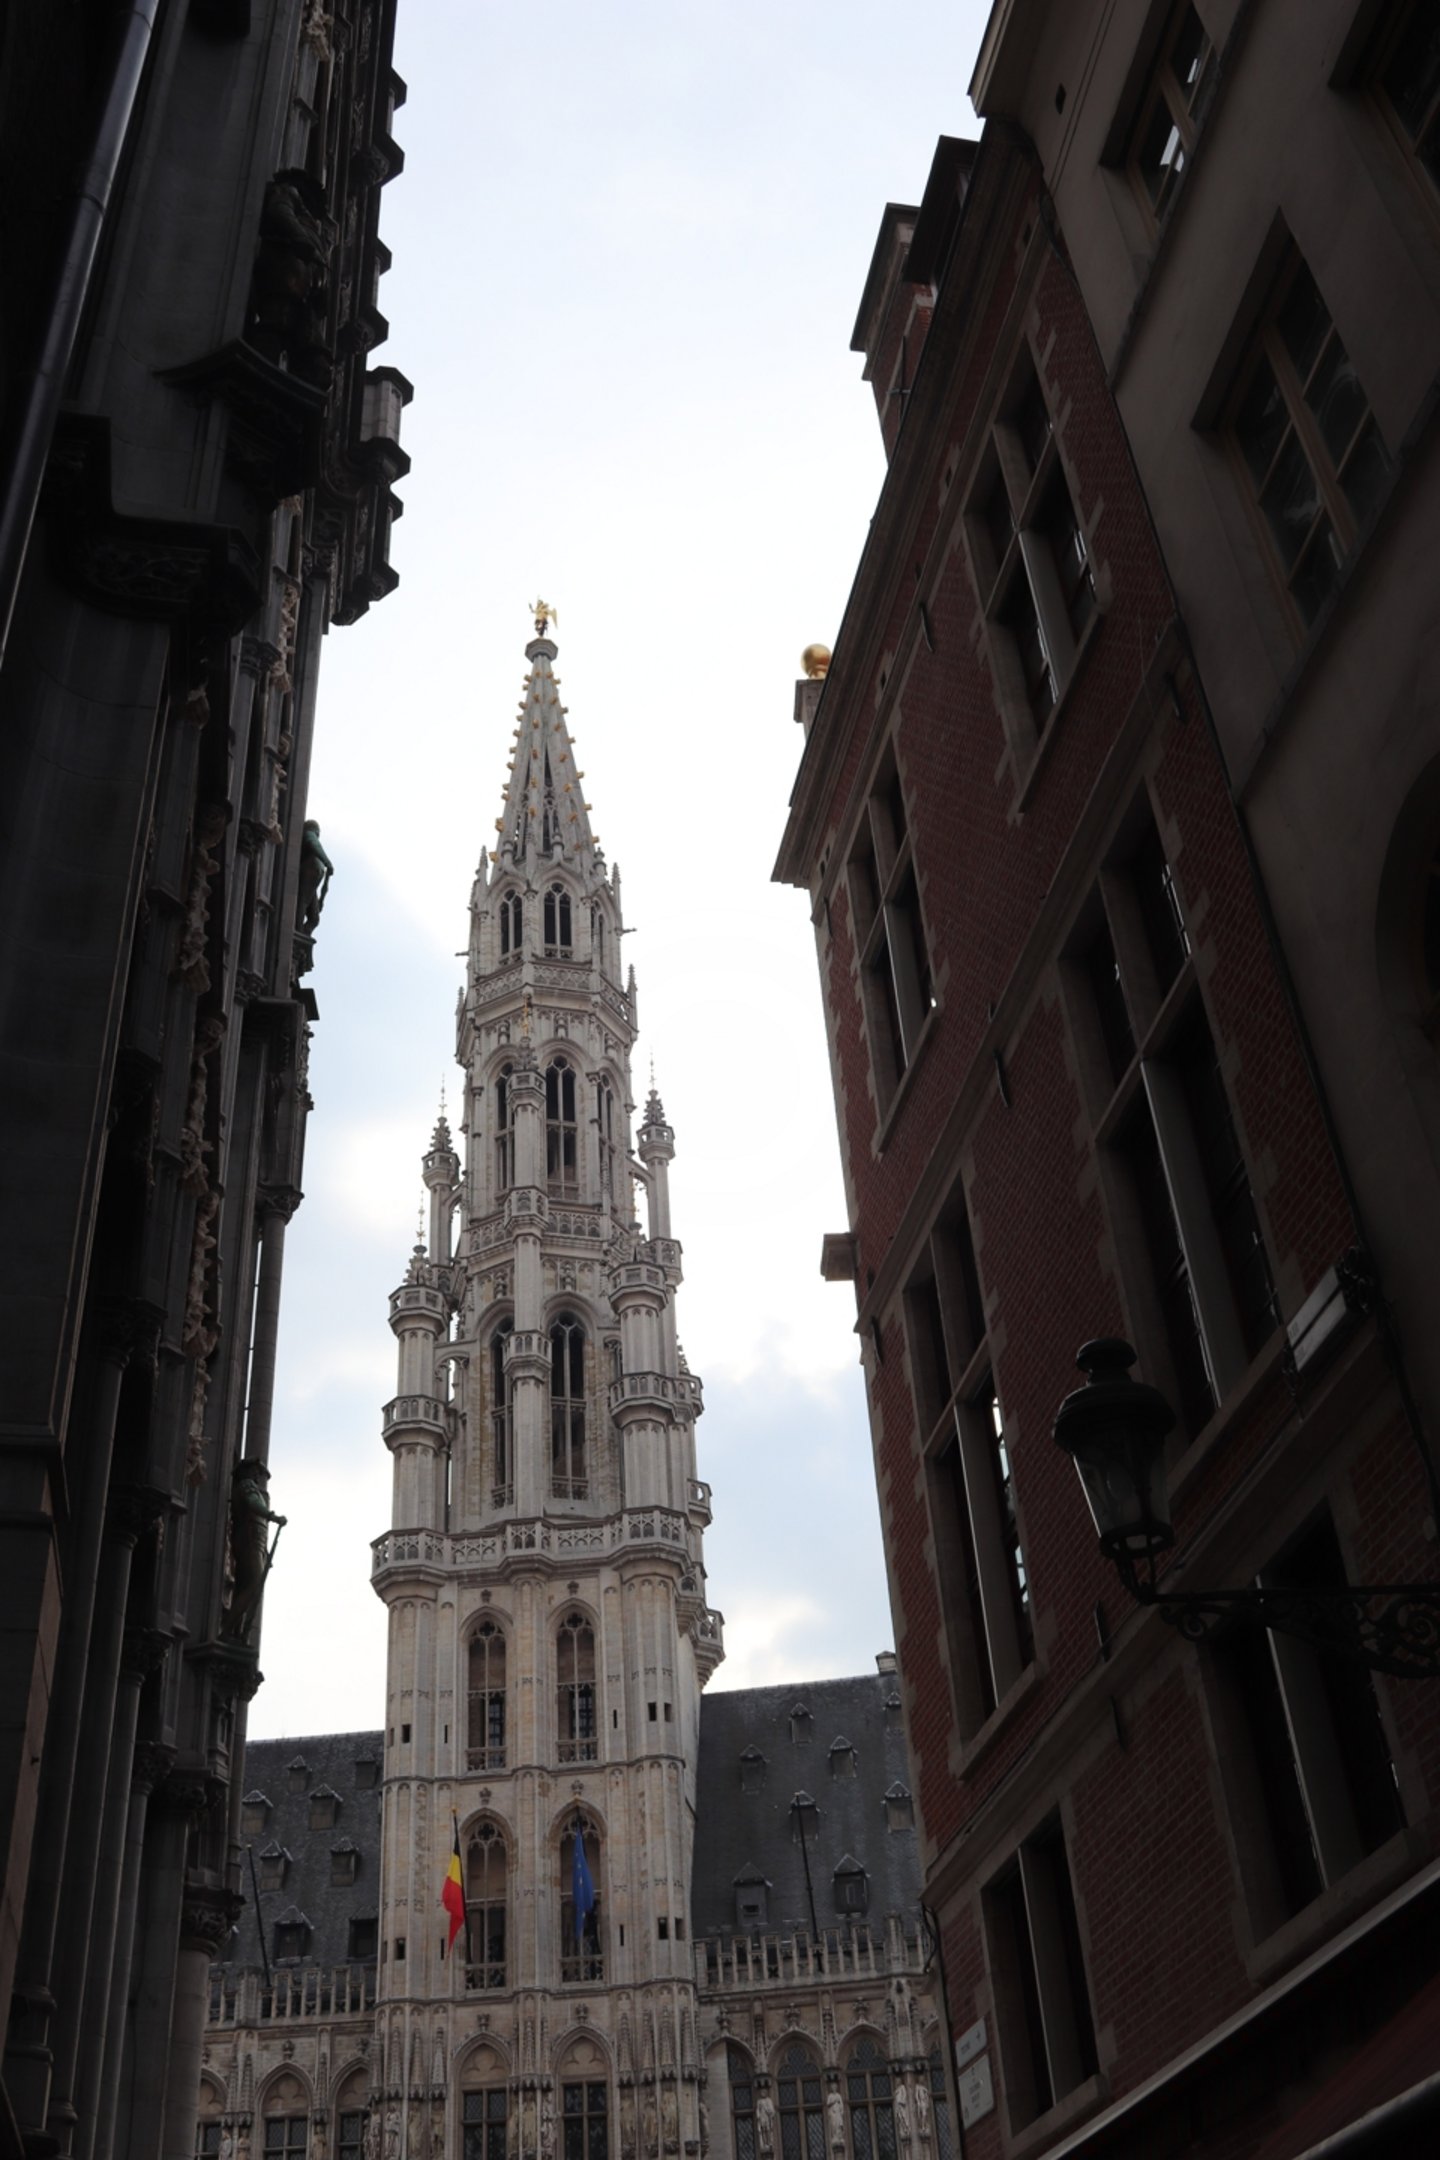 Part of the Grand Place in Brussels